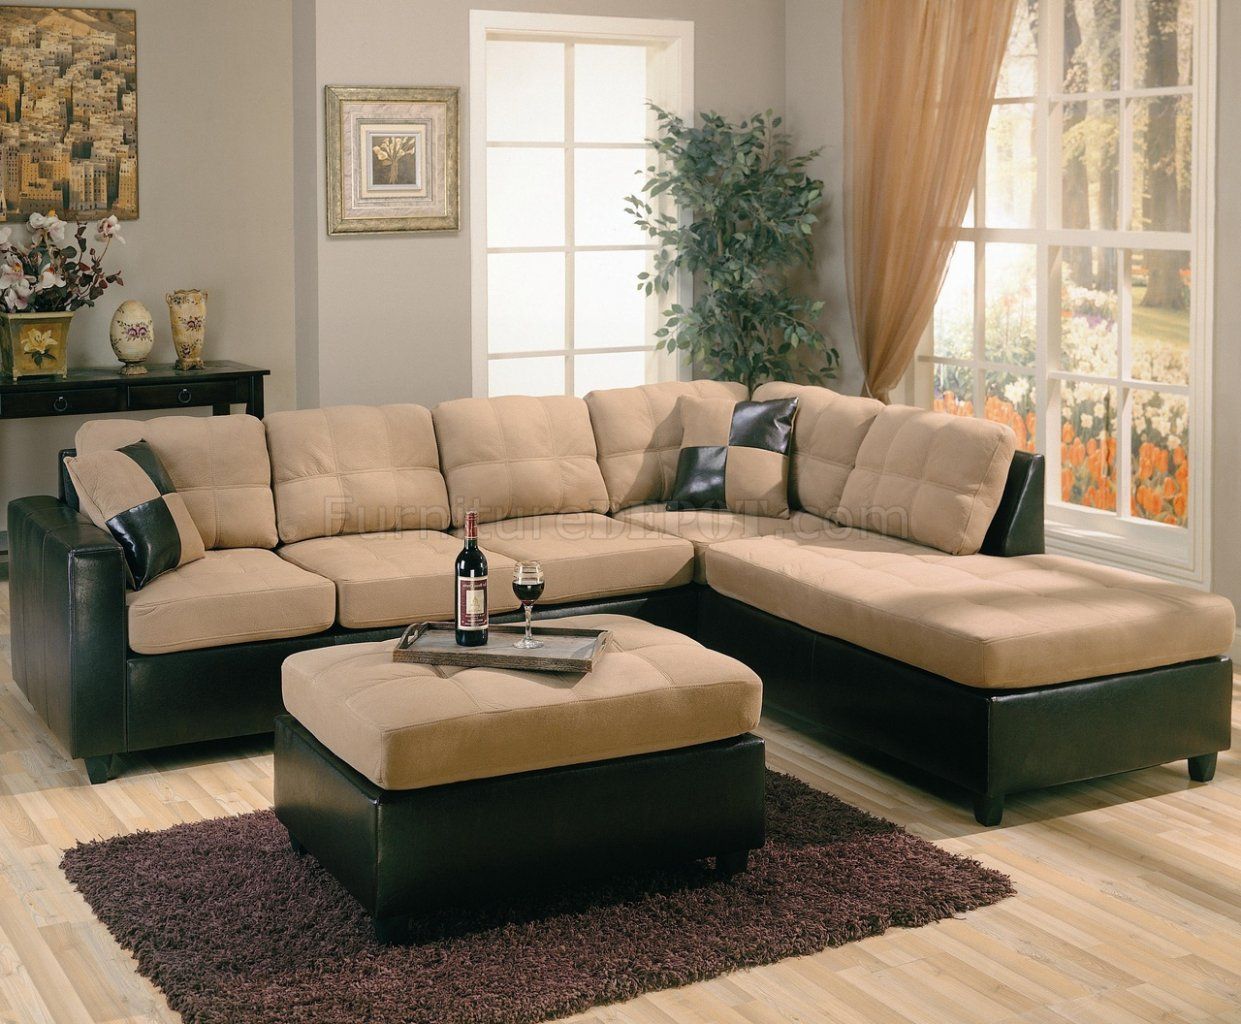 Two Tone Tan Microfiber & Dark Brown Faux Leather Sectional Sofa Intended For 2 Tone Chocolate Microfiber Sofas (View 11 of 20)